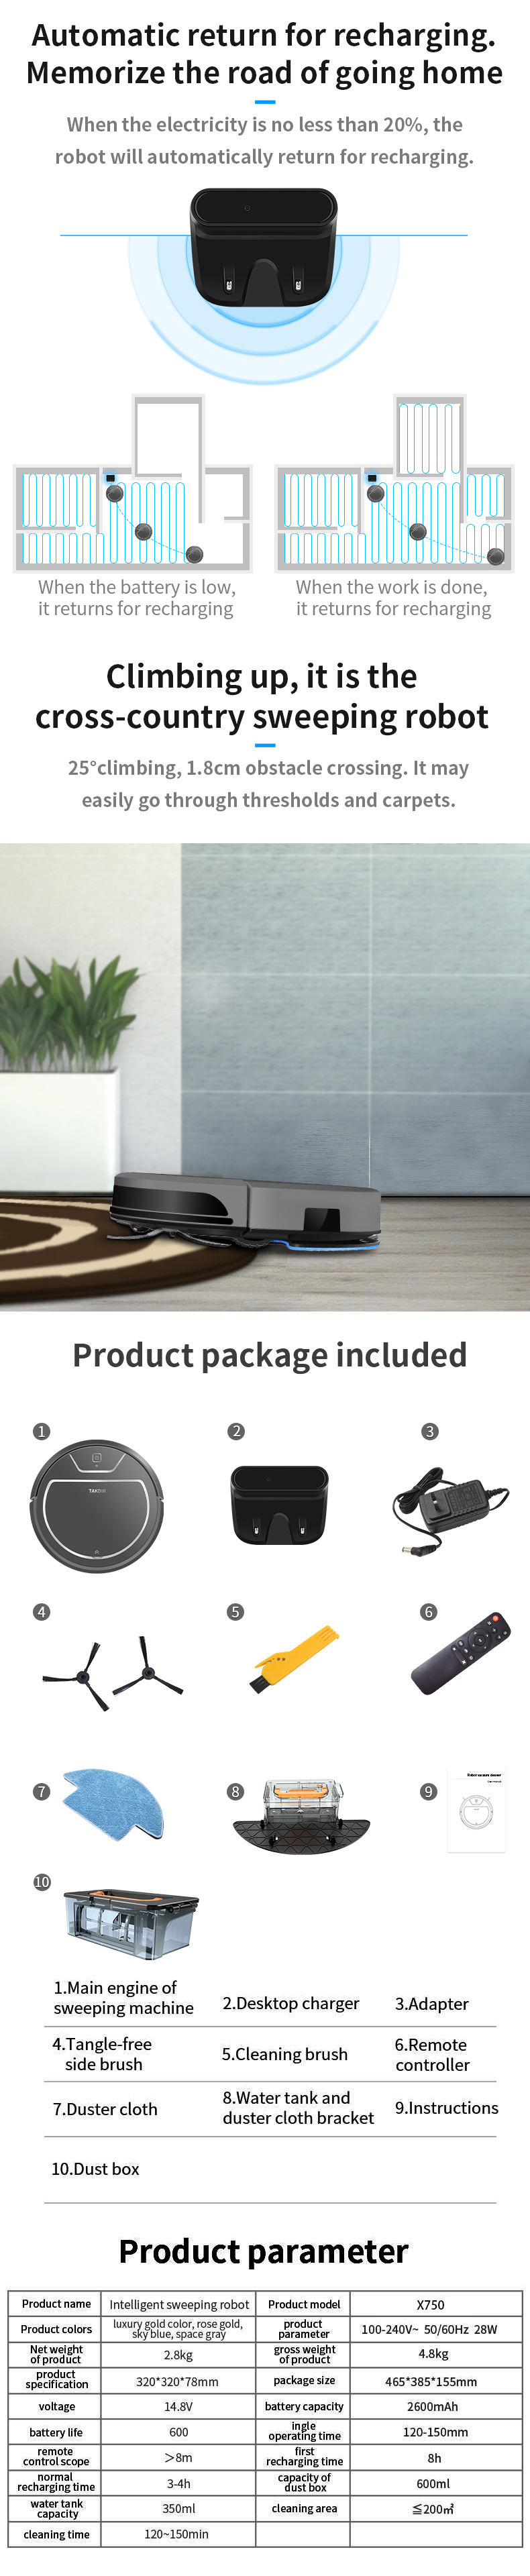 Cordless Carpet Cleaner and Robotic Vacuum Cleaner Have 2000PA Suction Power, Can Work on Short-Haired Carpet and Long-Haired Carpet